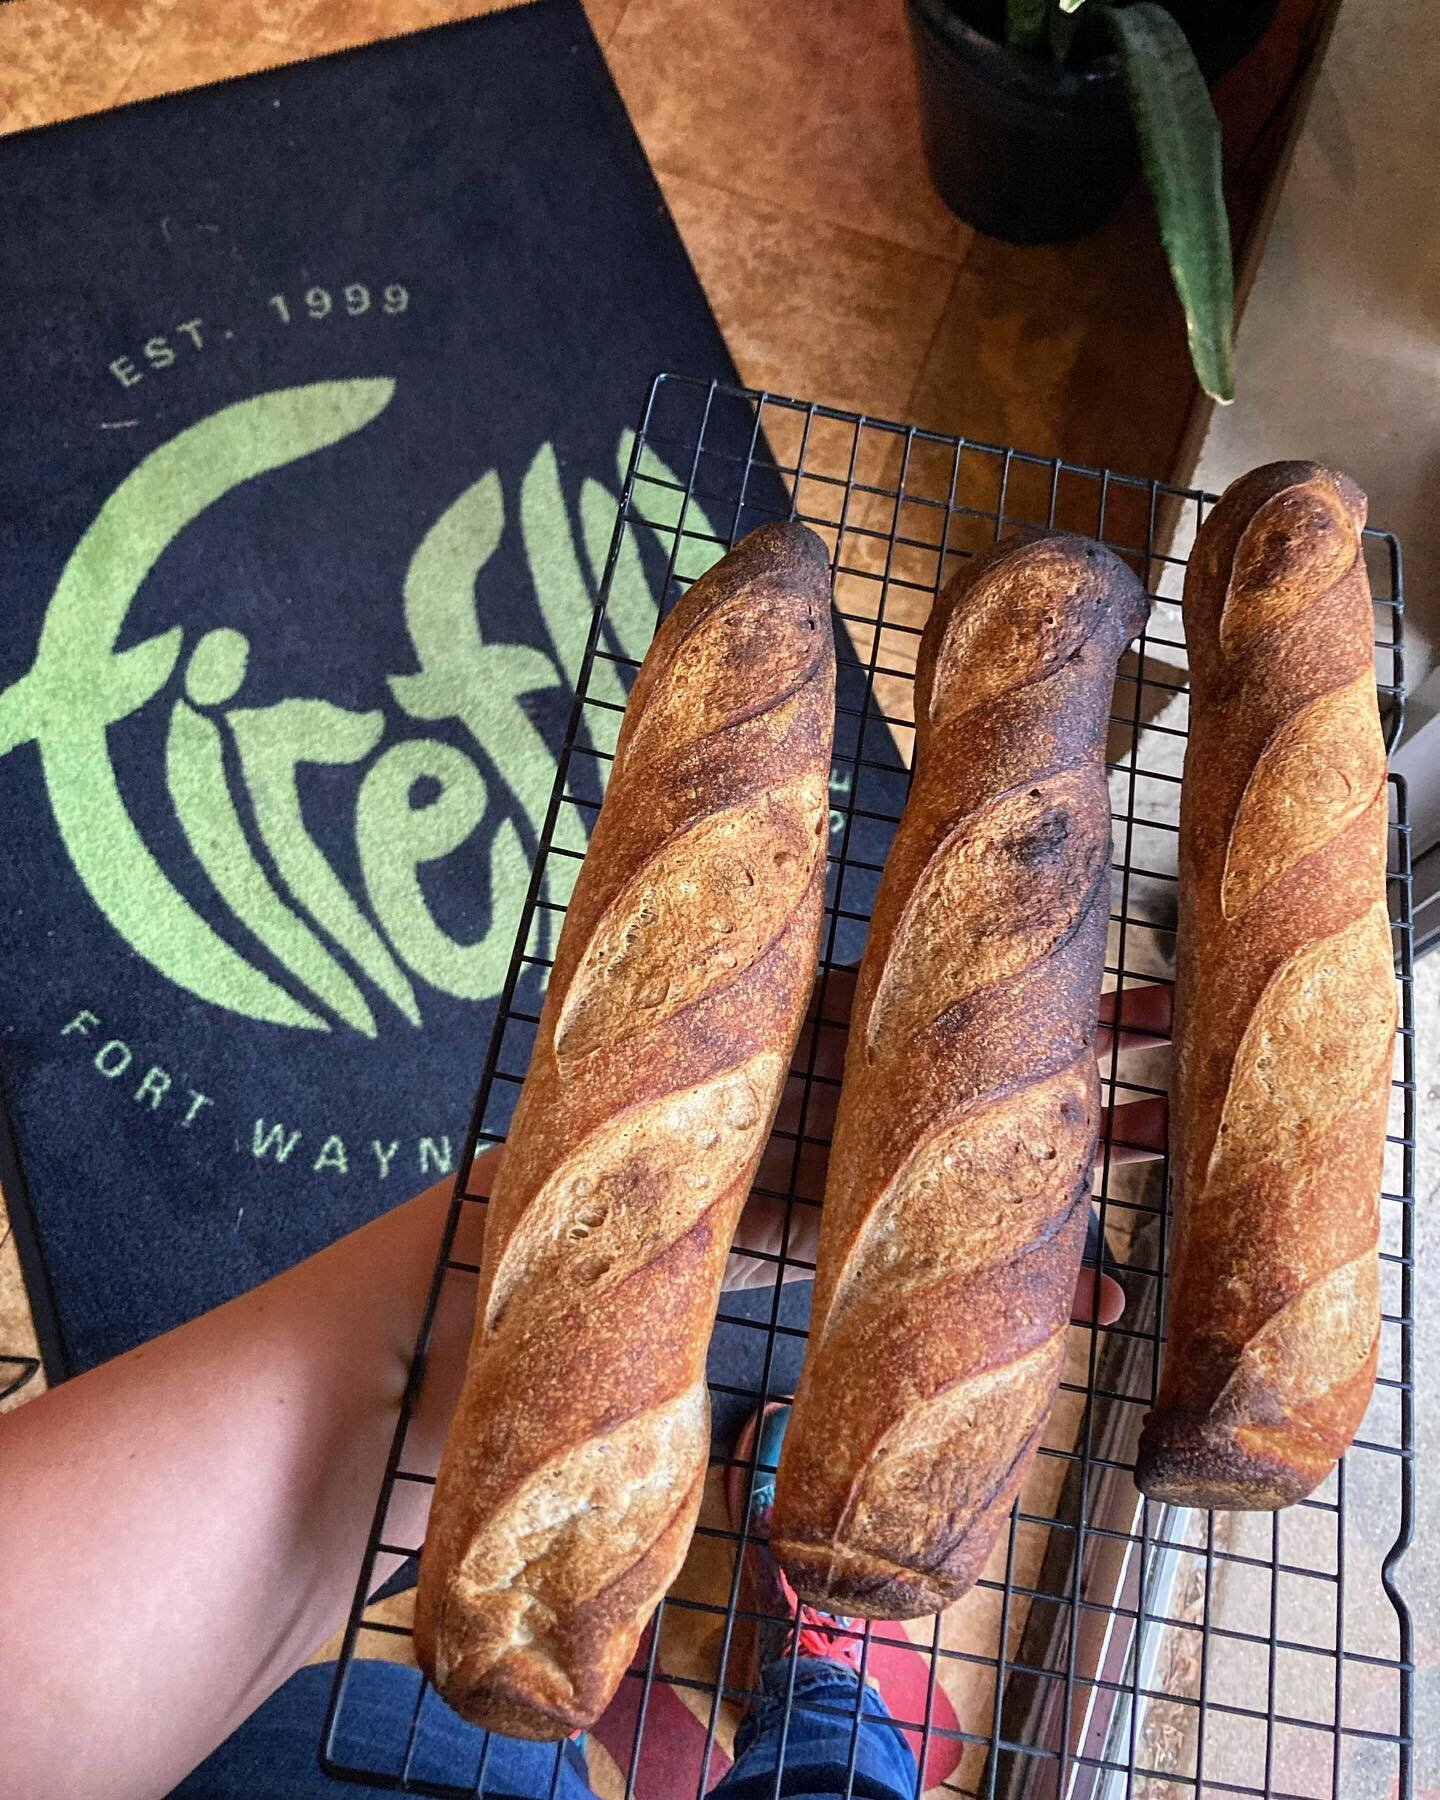 Firefly Coffeehouse allows Good Bread for All to use its kitchen in the evenings.